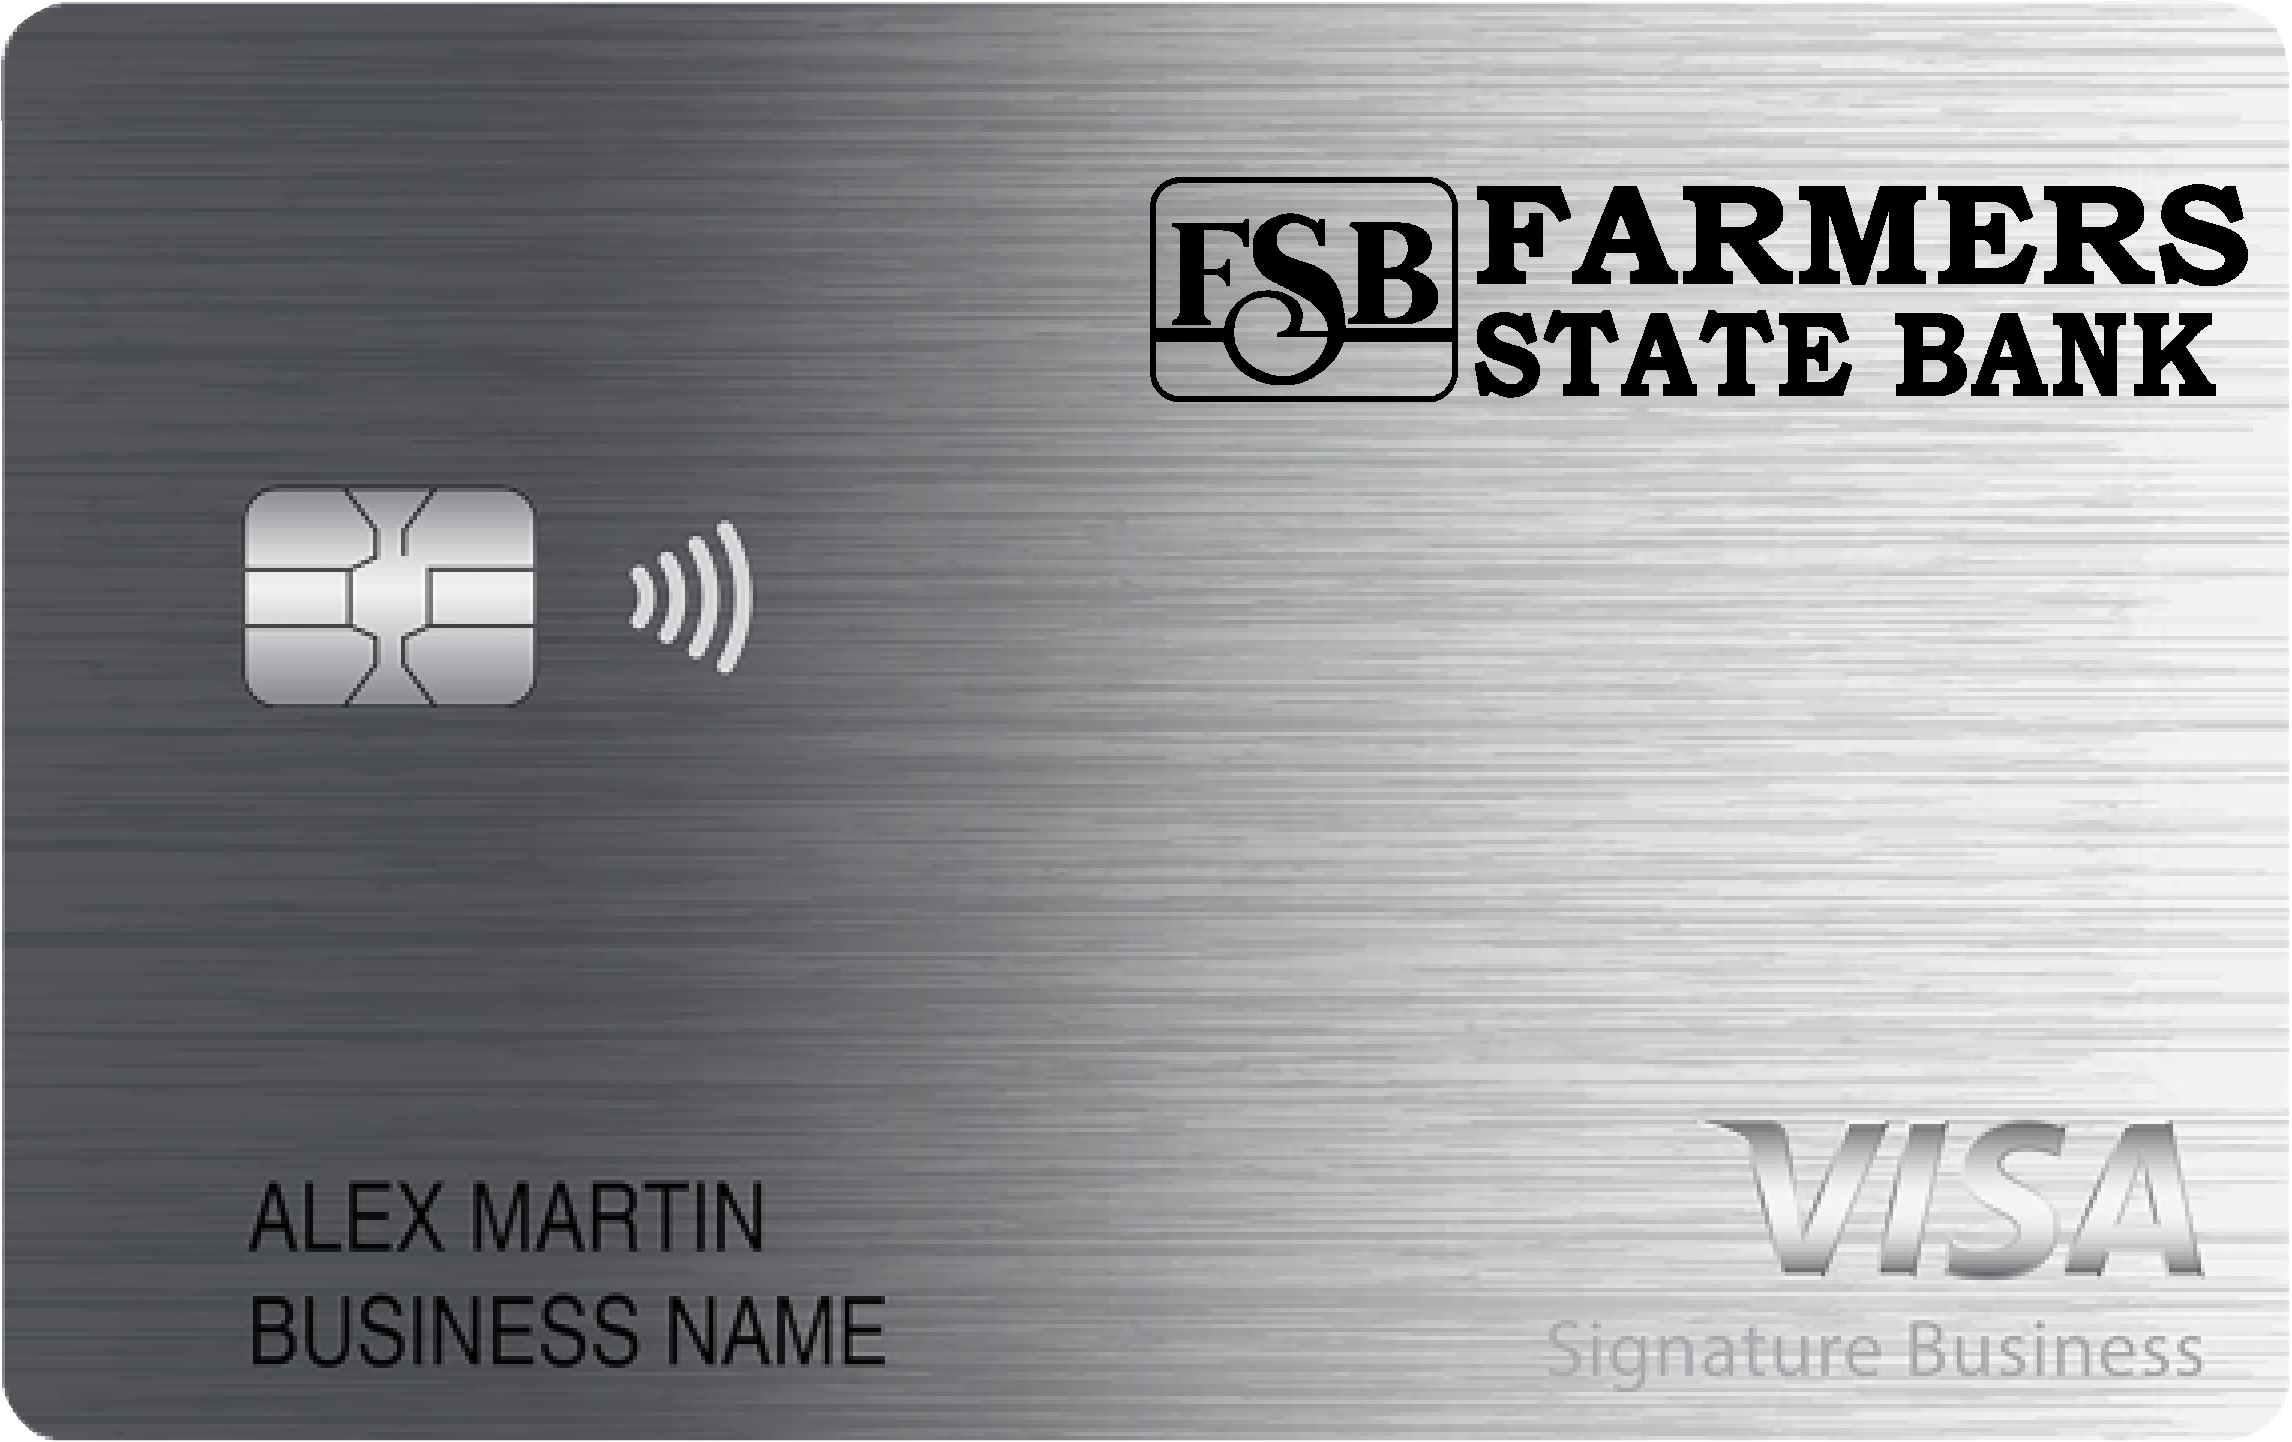 Farmers State Bank Smart Business Rewards Card